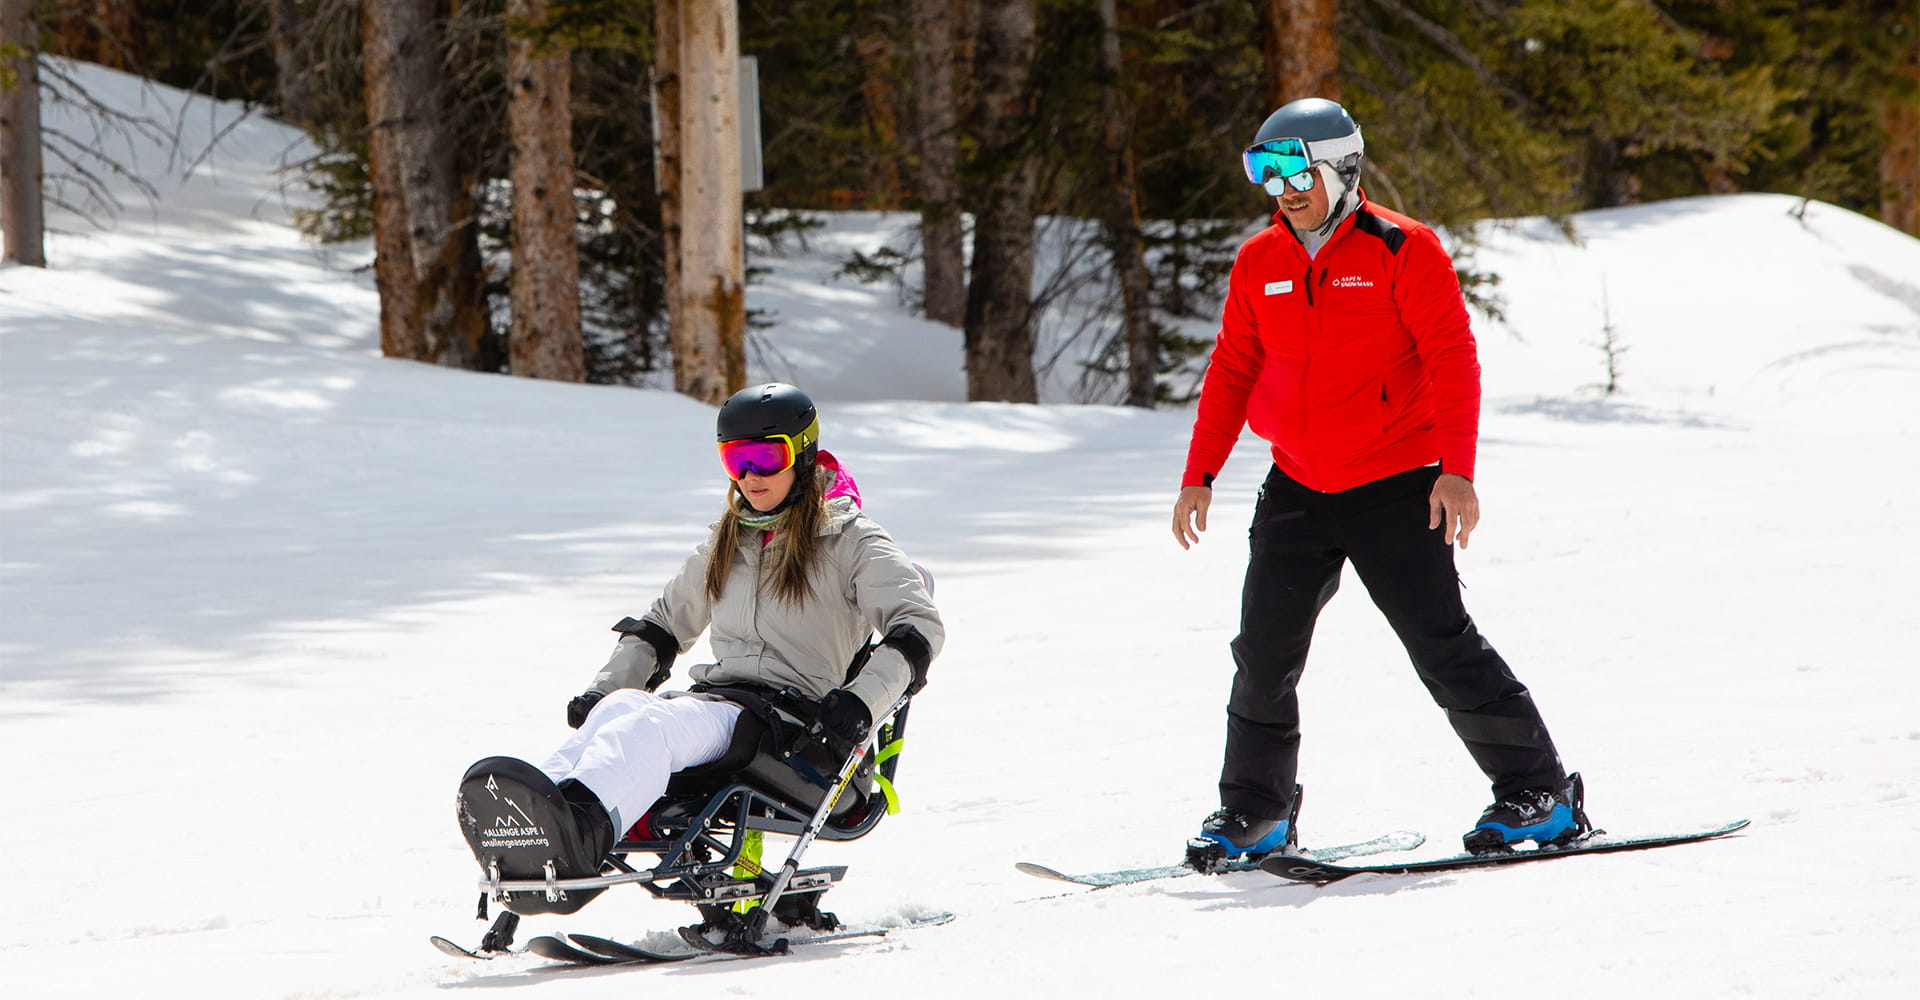 Accessibility Ski Lesson at Aspen Snowmass